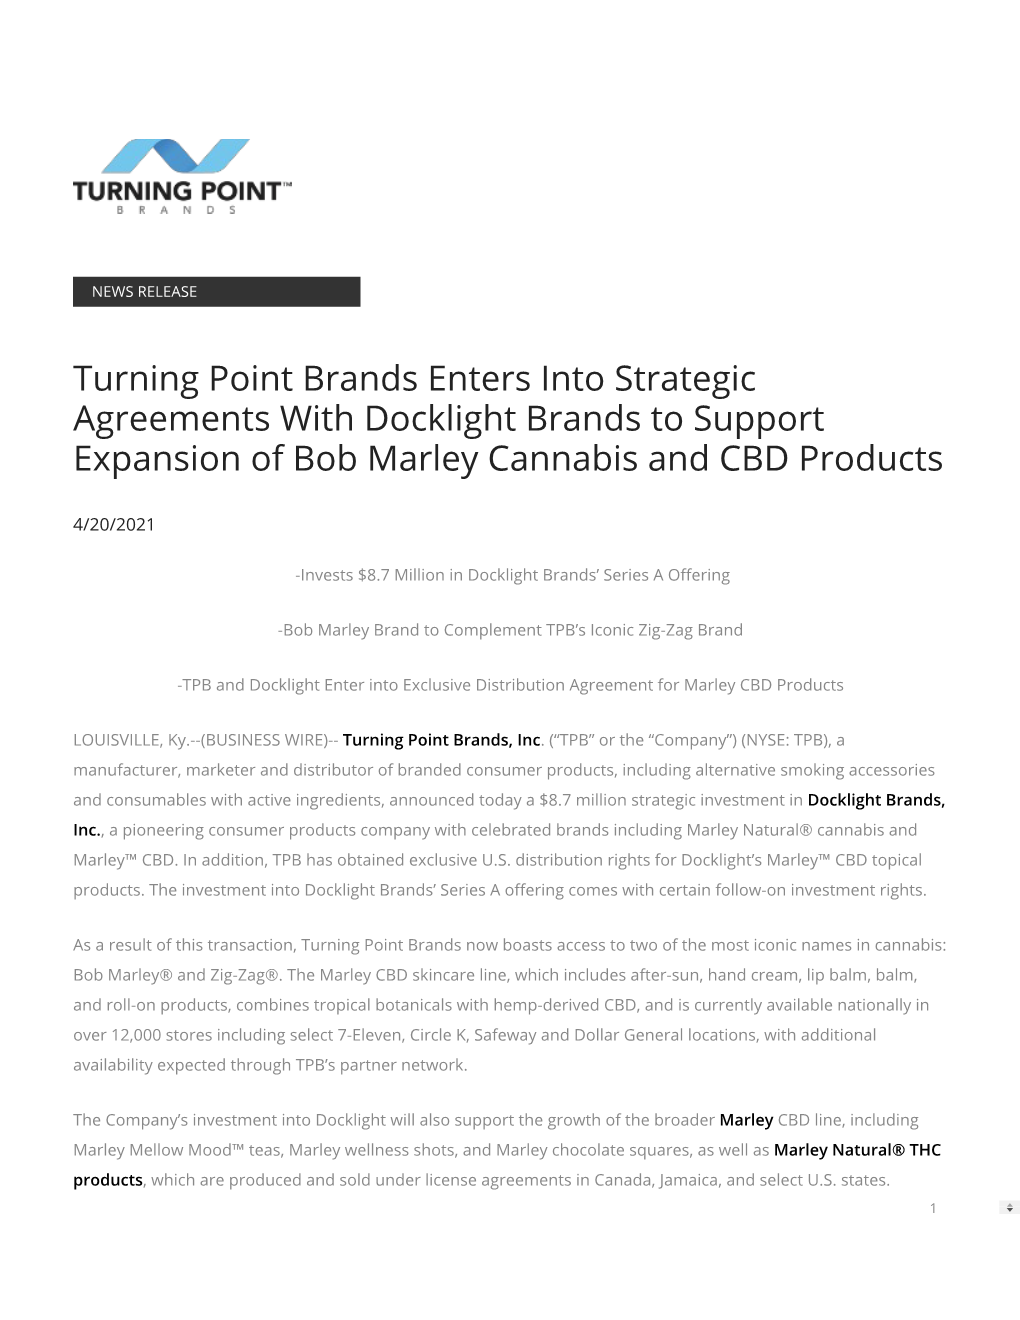 Turning Point Brands Enters Into Strategic Agreements with Docklight Brands to Support Expansion of Bob Marley Cannabis and CBD Products